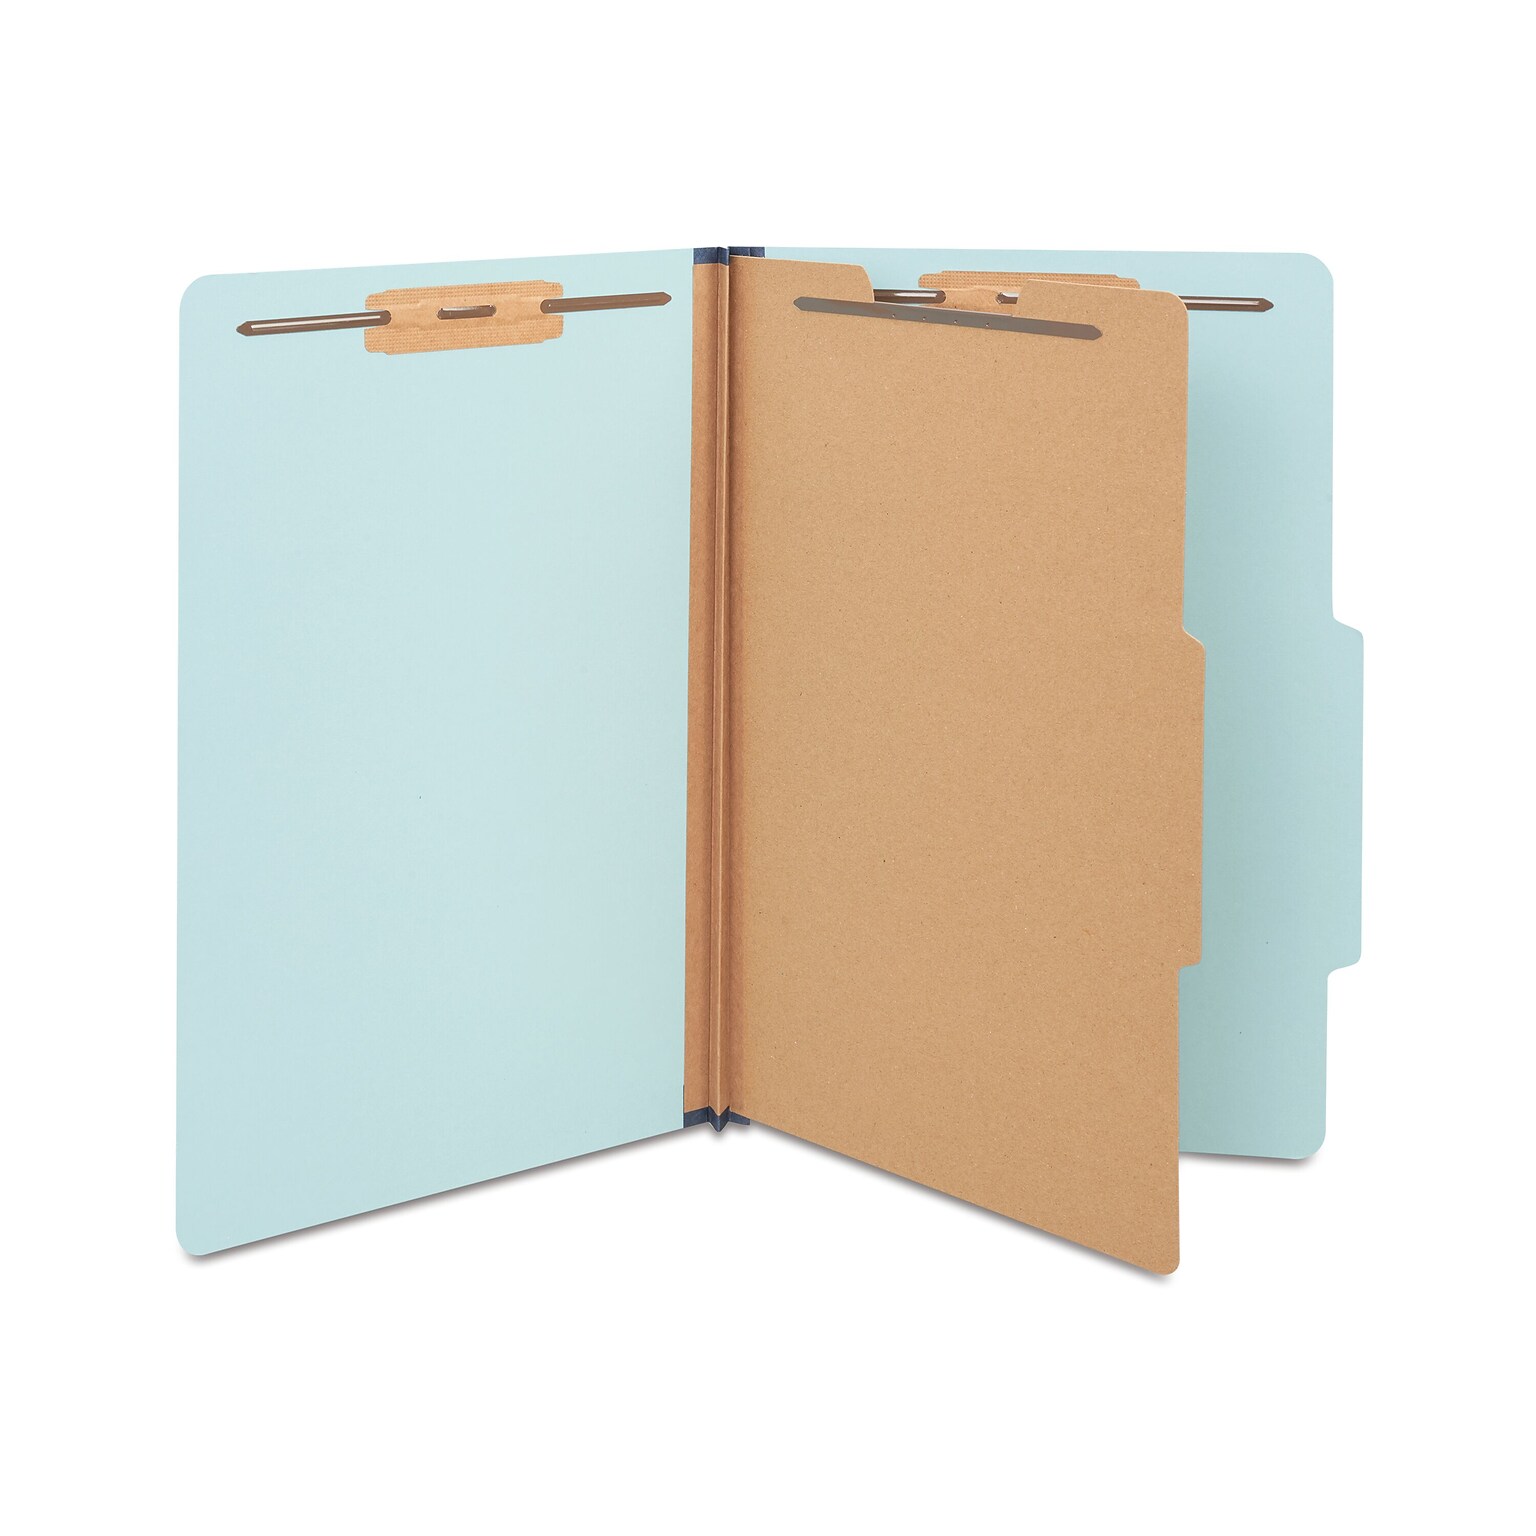 Staples 60% Recycled Pressboard Classification Folder, 1-Divider, 1.75 Expansion, Legal Size, Light Blue, 20/Box